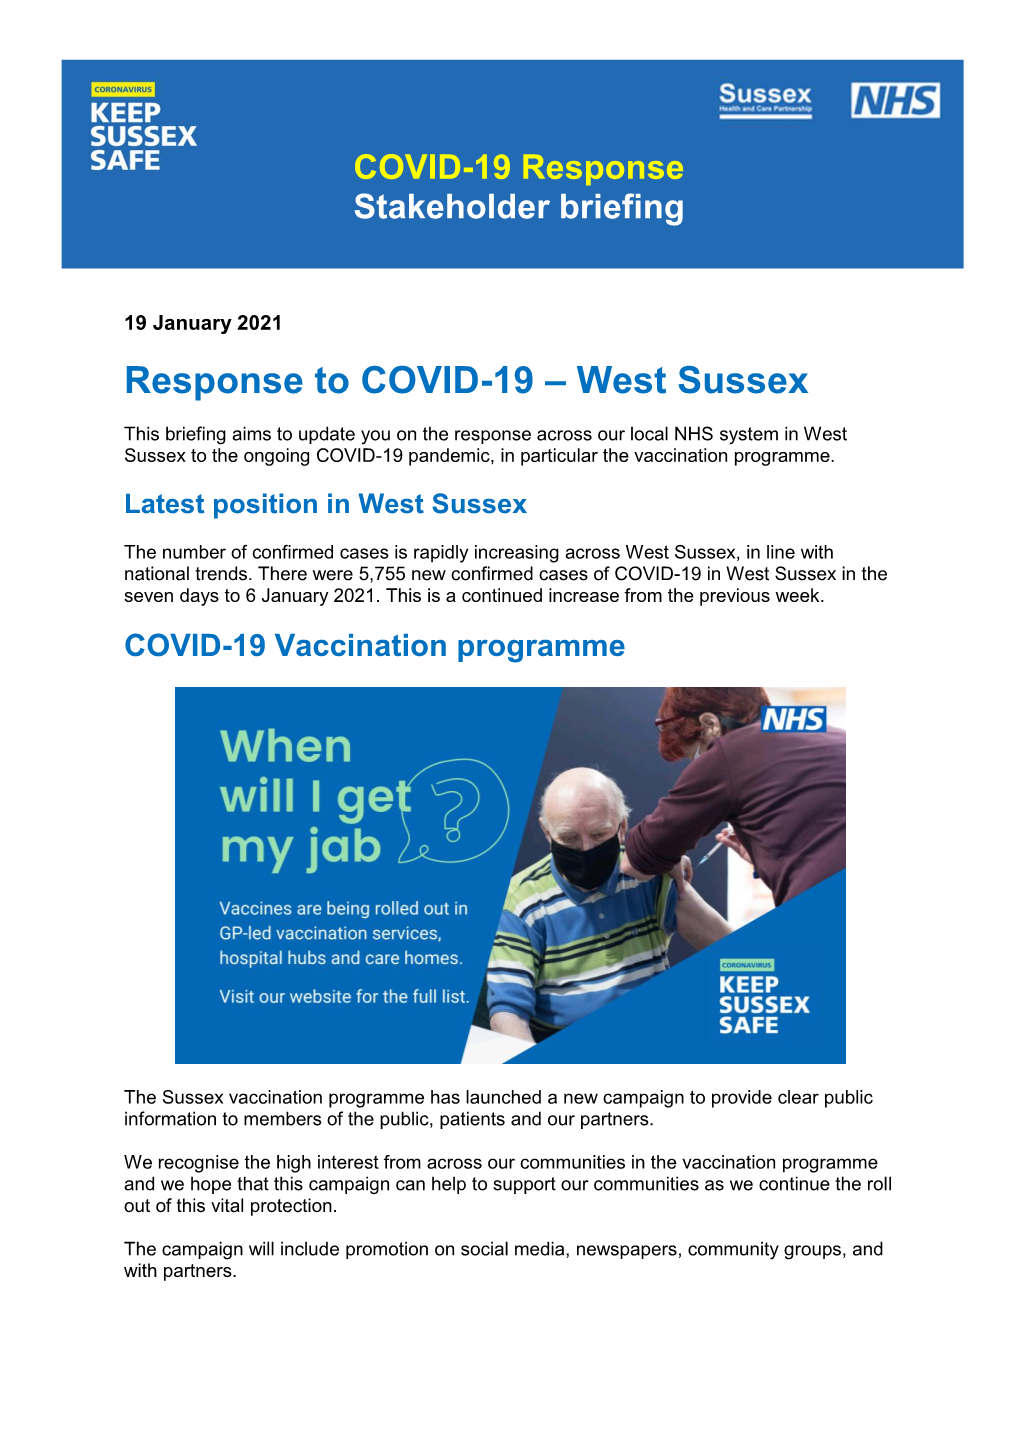 West Sussex COVID-19 Vaccination Stakeholder Briefing 19.01.21